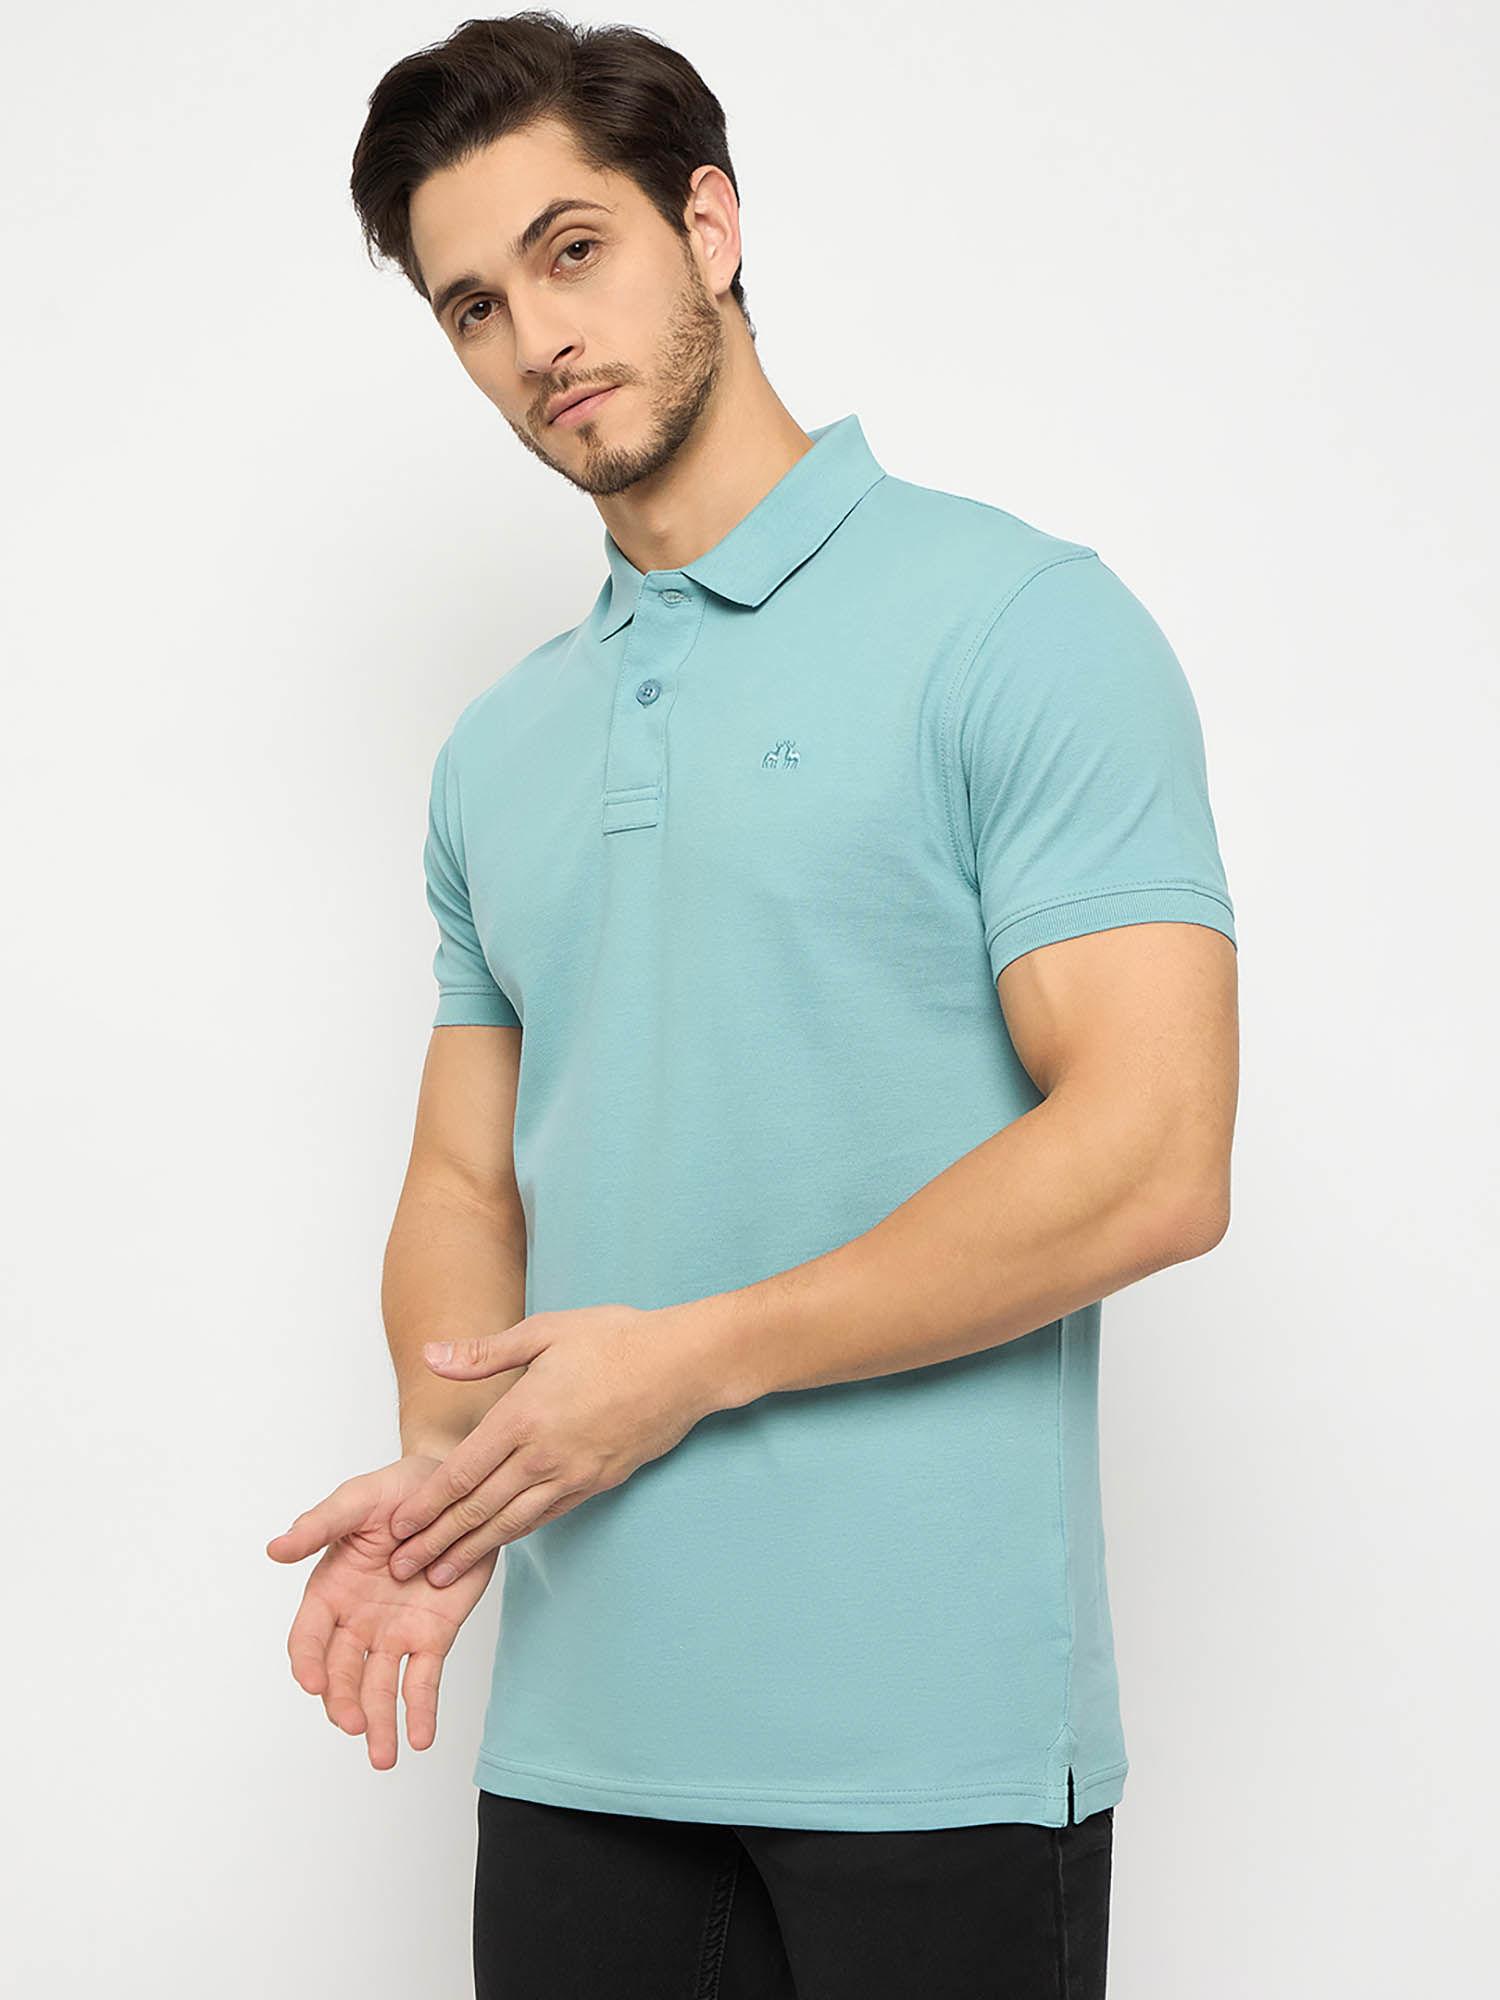 mens half sleeves turquoise polo t-shirt